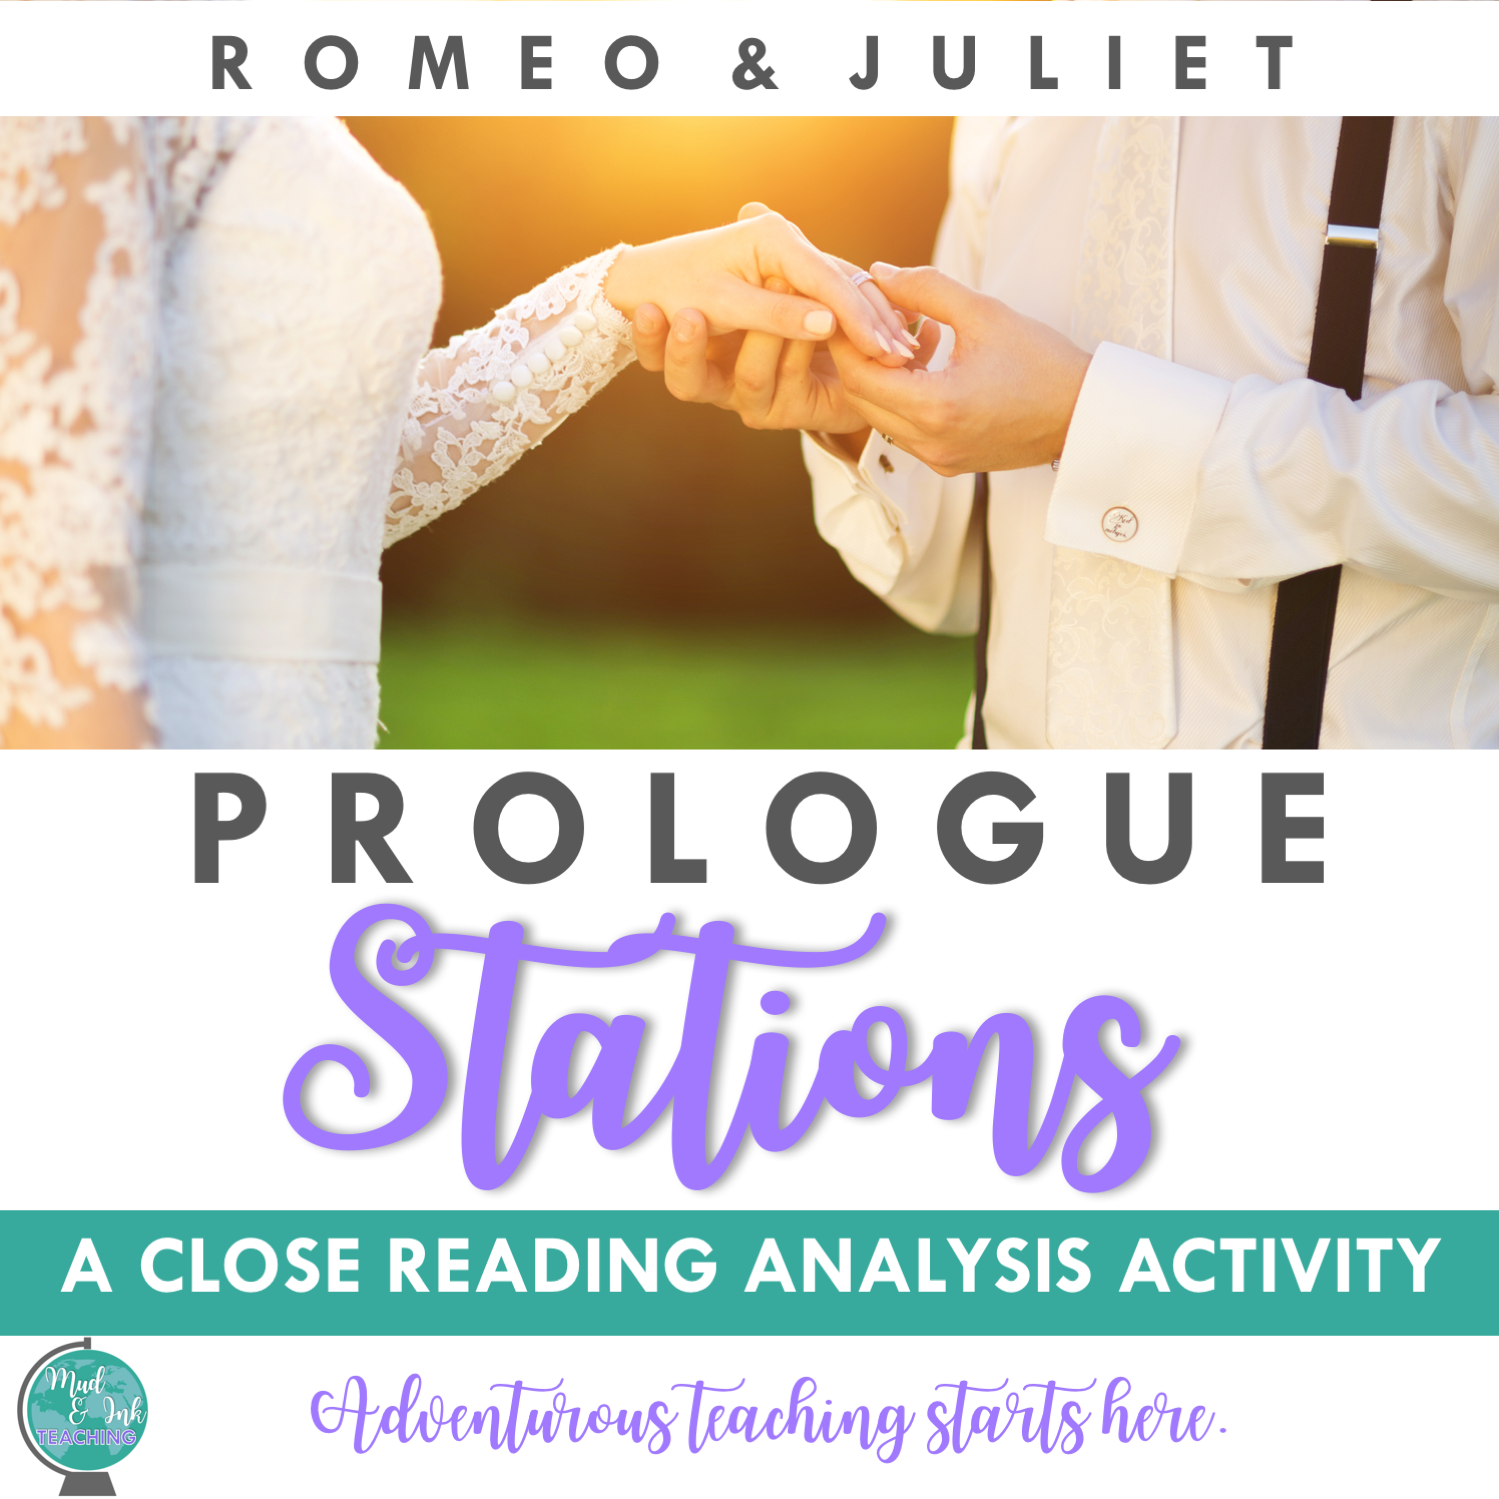 Romeo & Juliet: Prologue Stations: A close reading analysis activity (Copy)